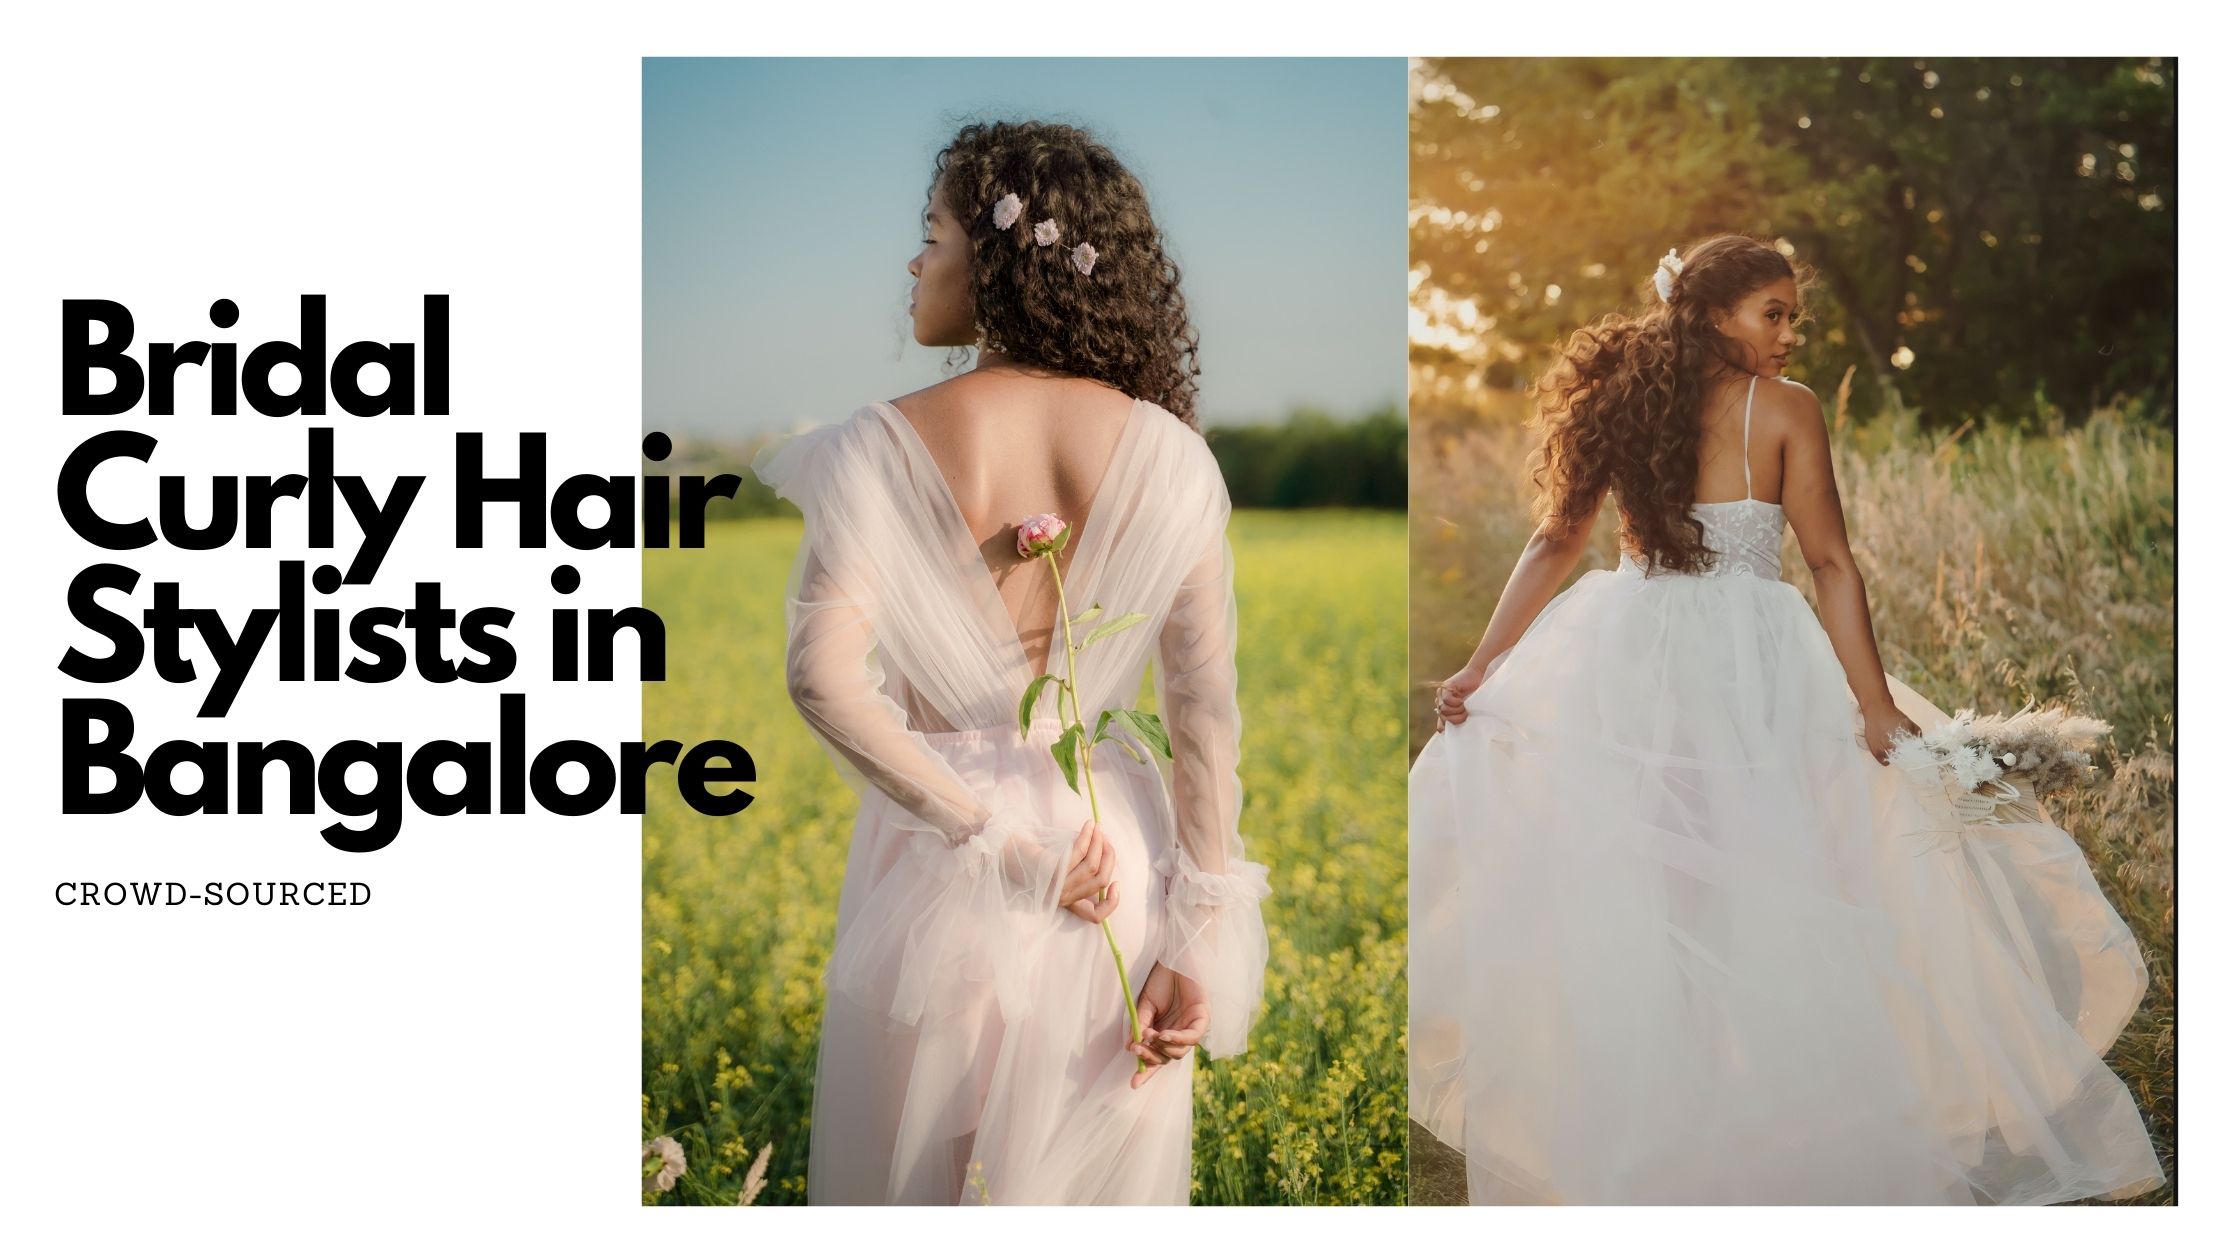 bridal curly hair stylists in bangalore cover image